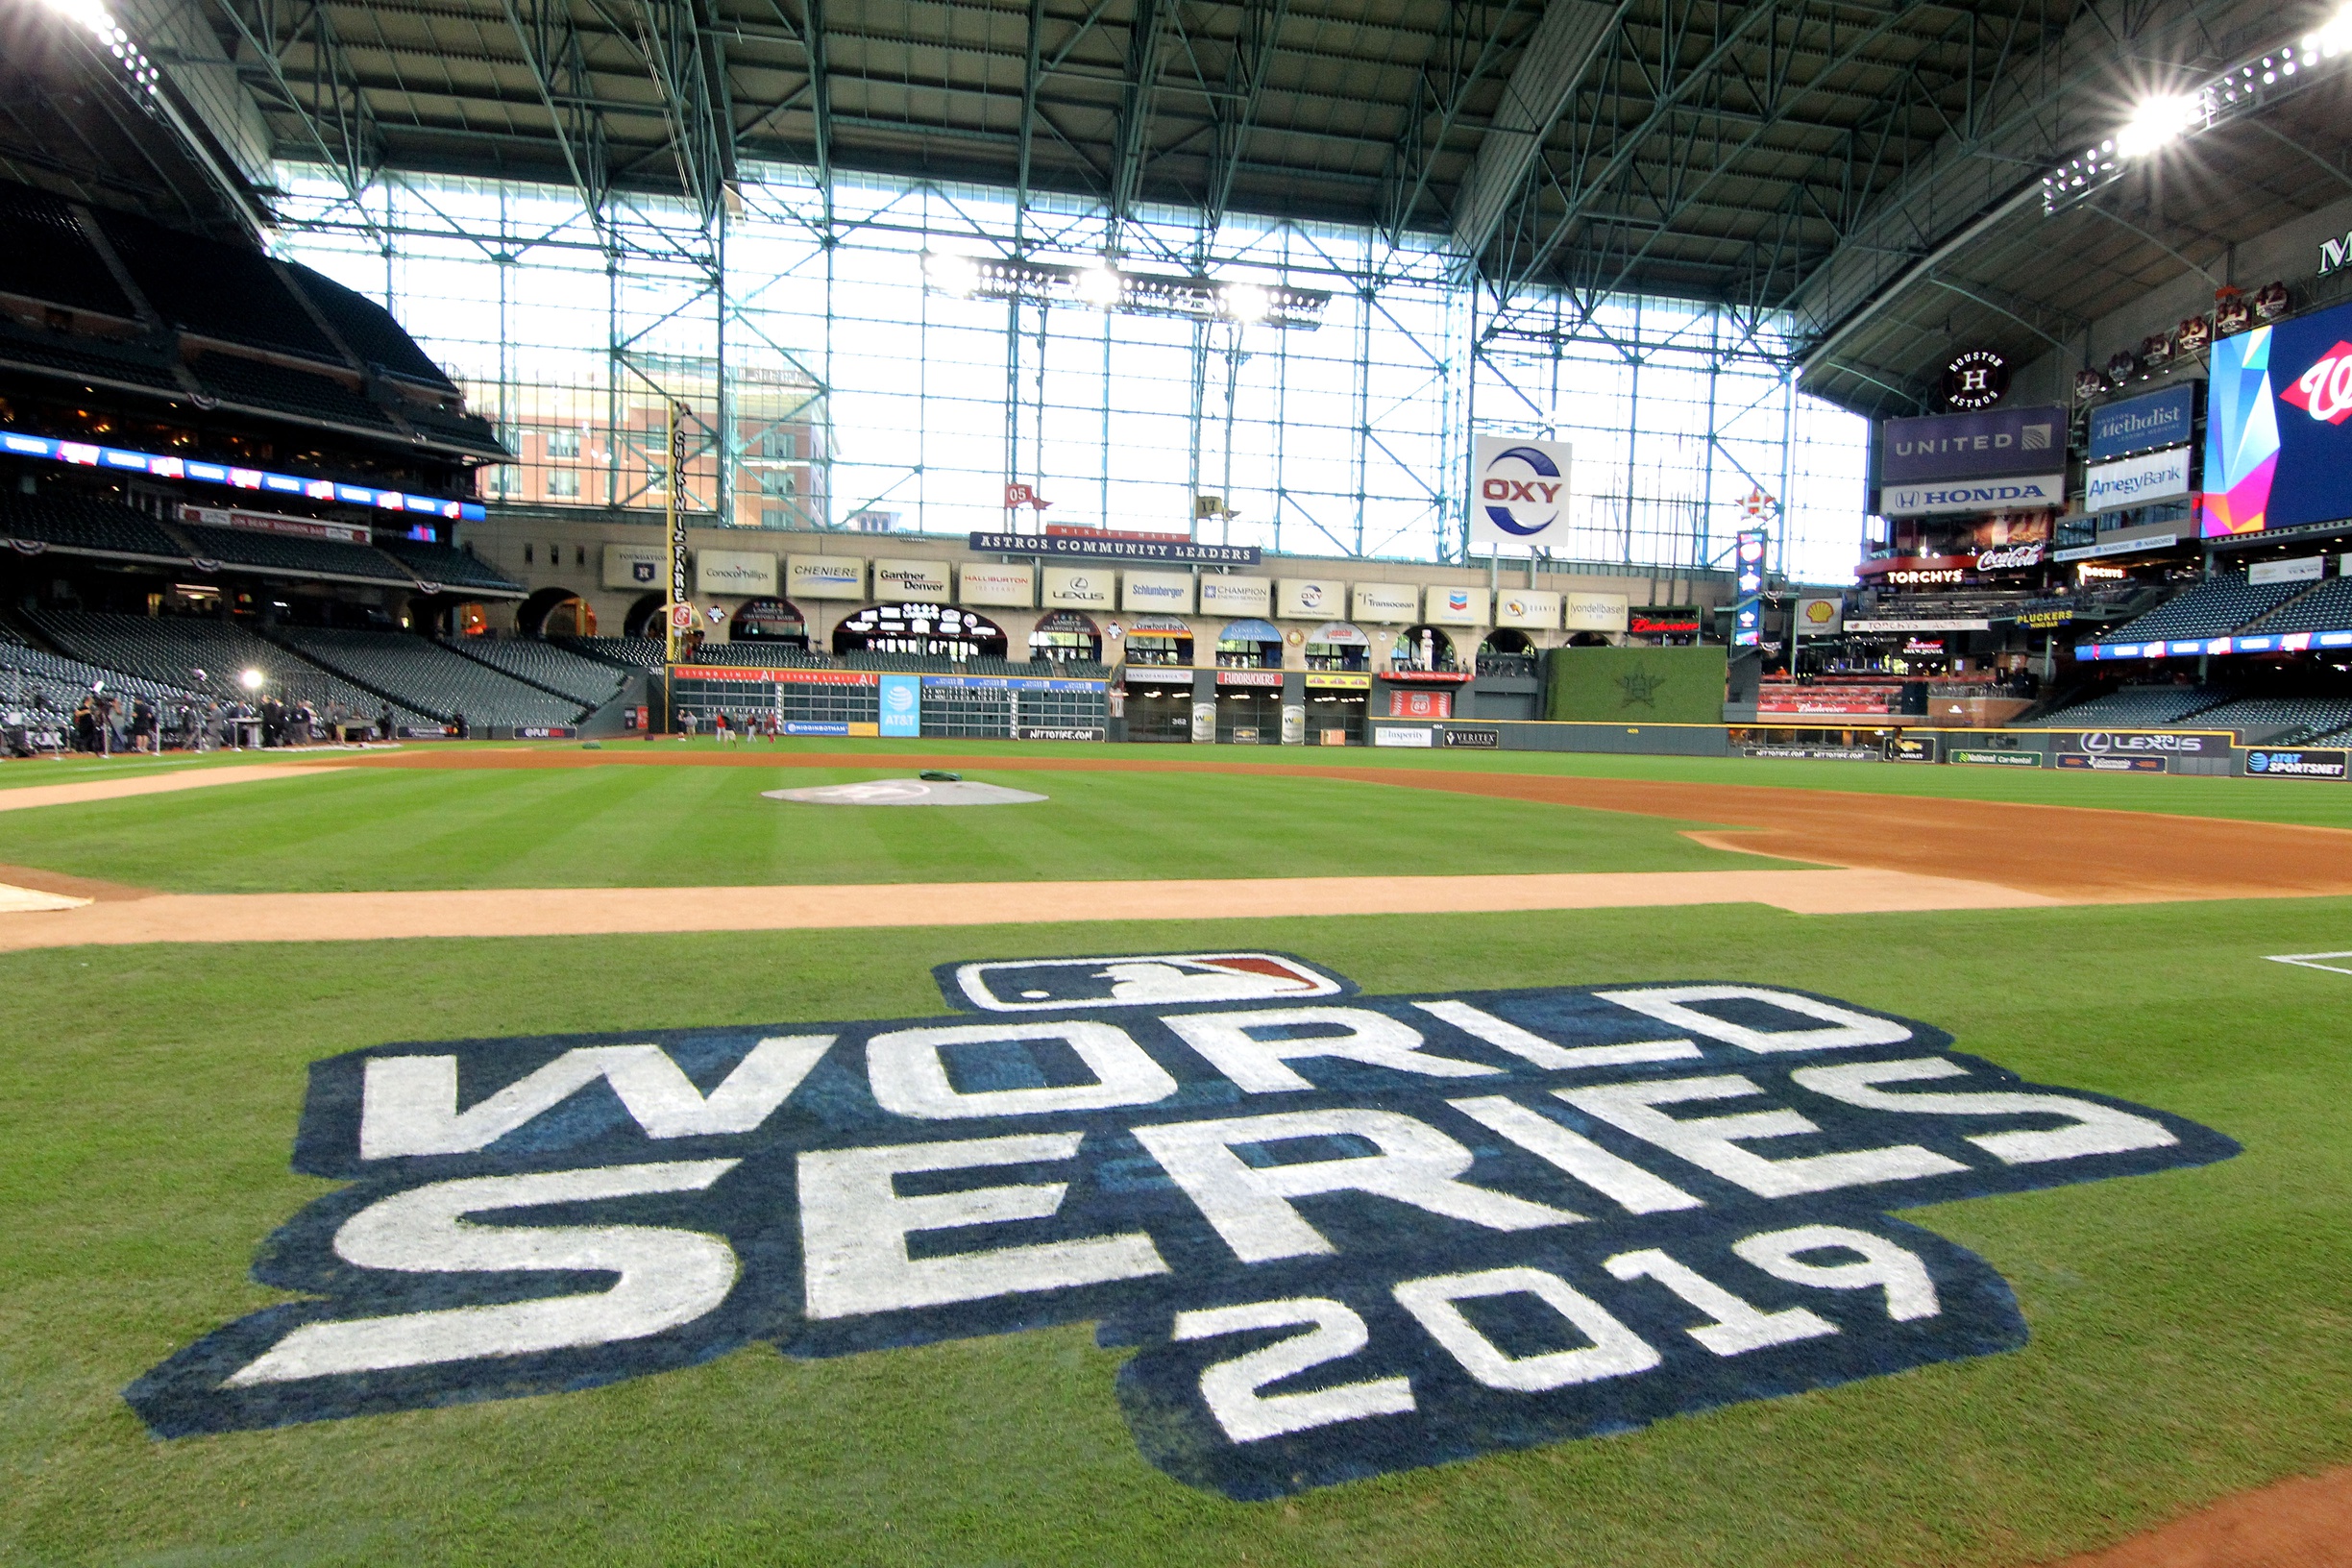 Astros unthinkable circumstances, unlikely hypothetical - SportsMap